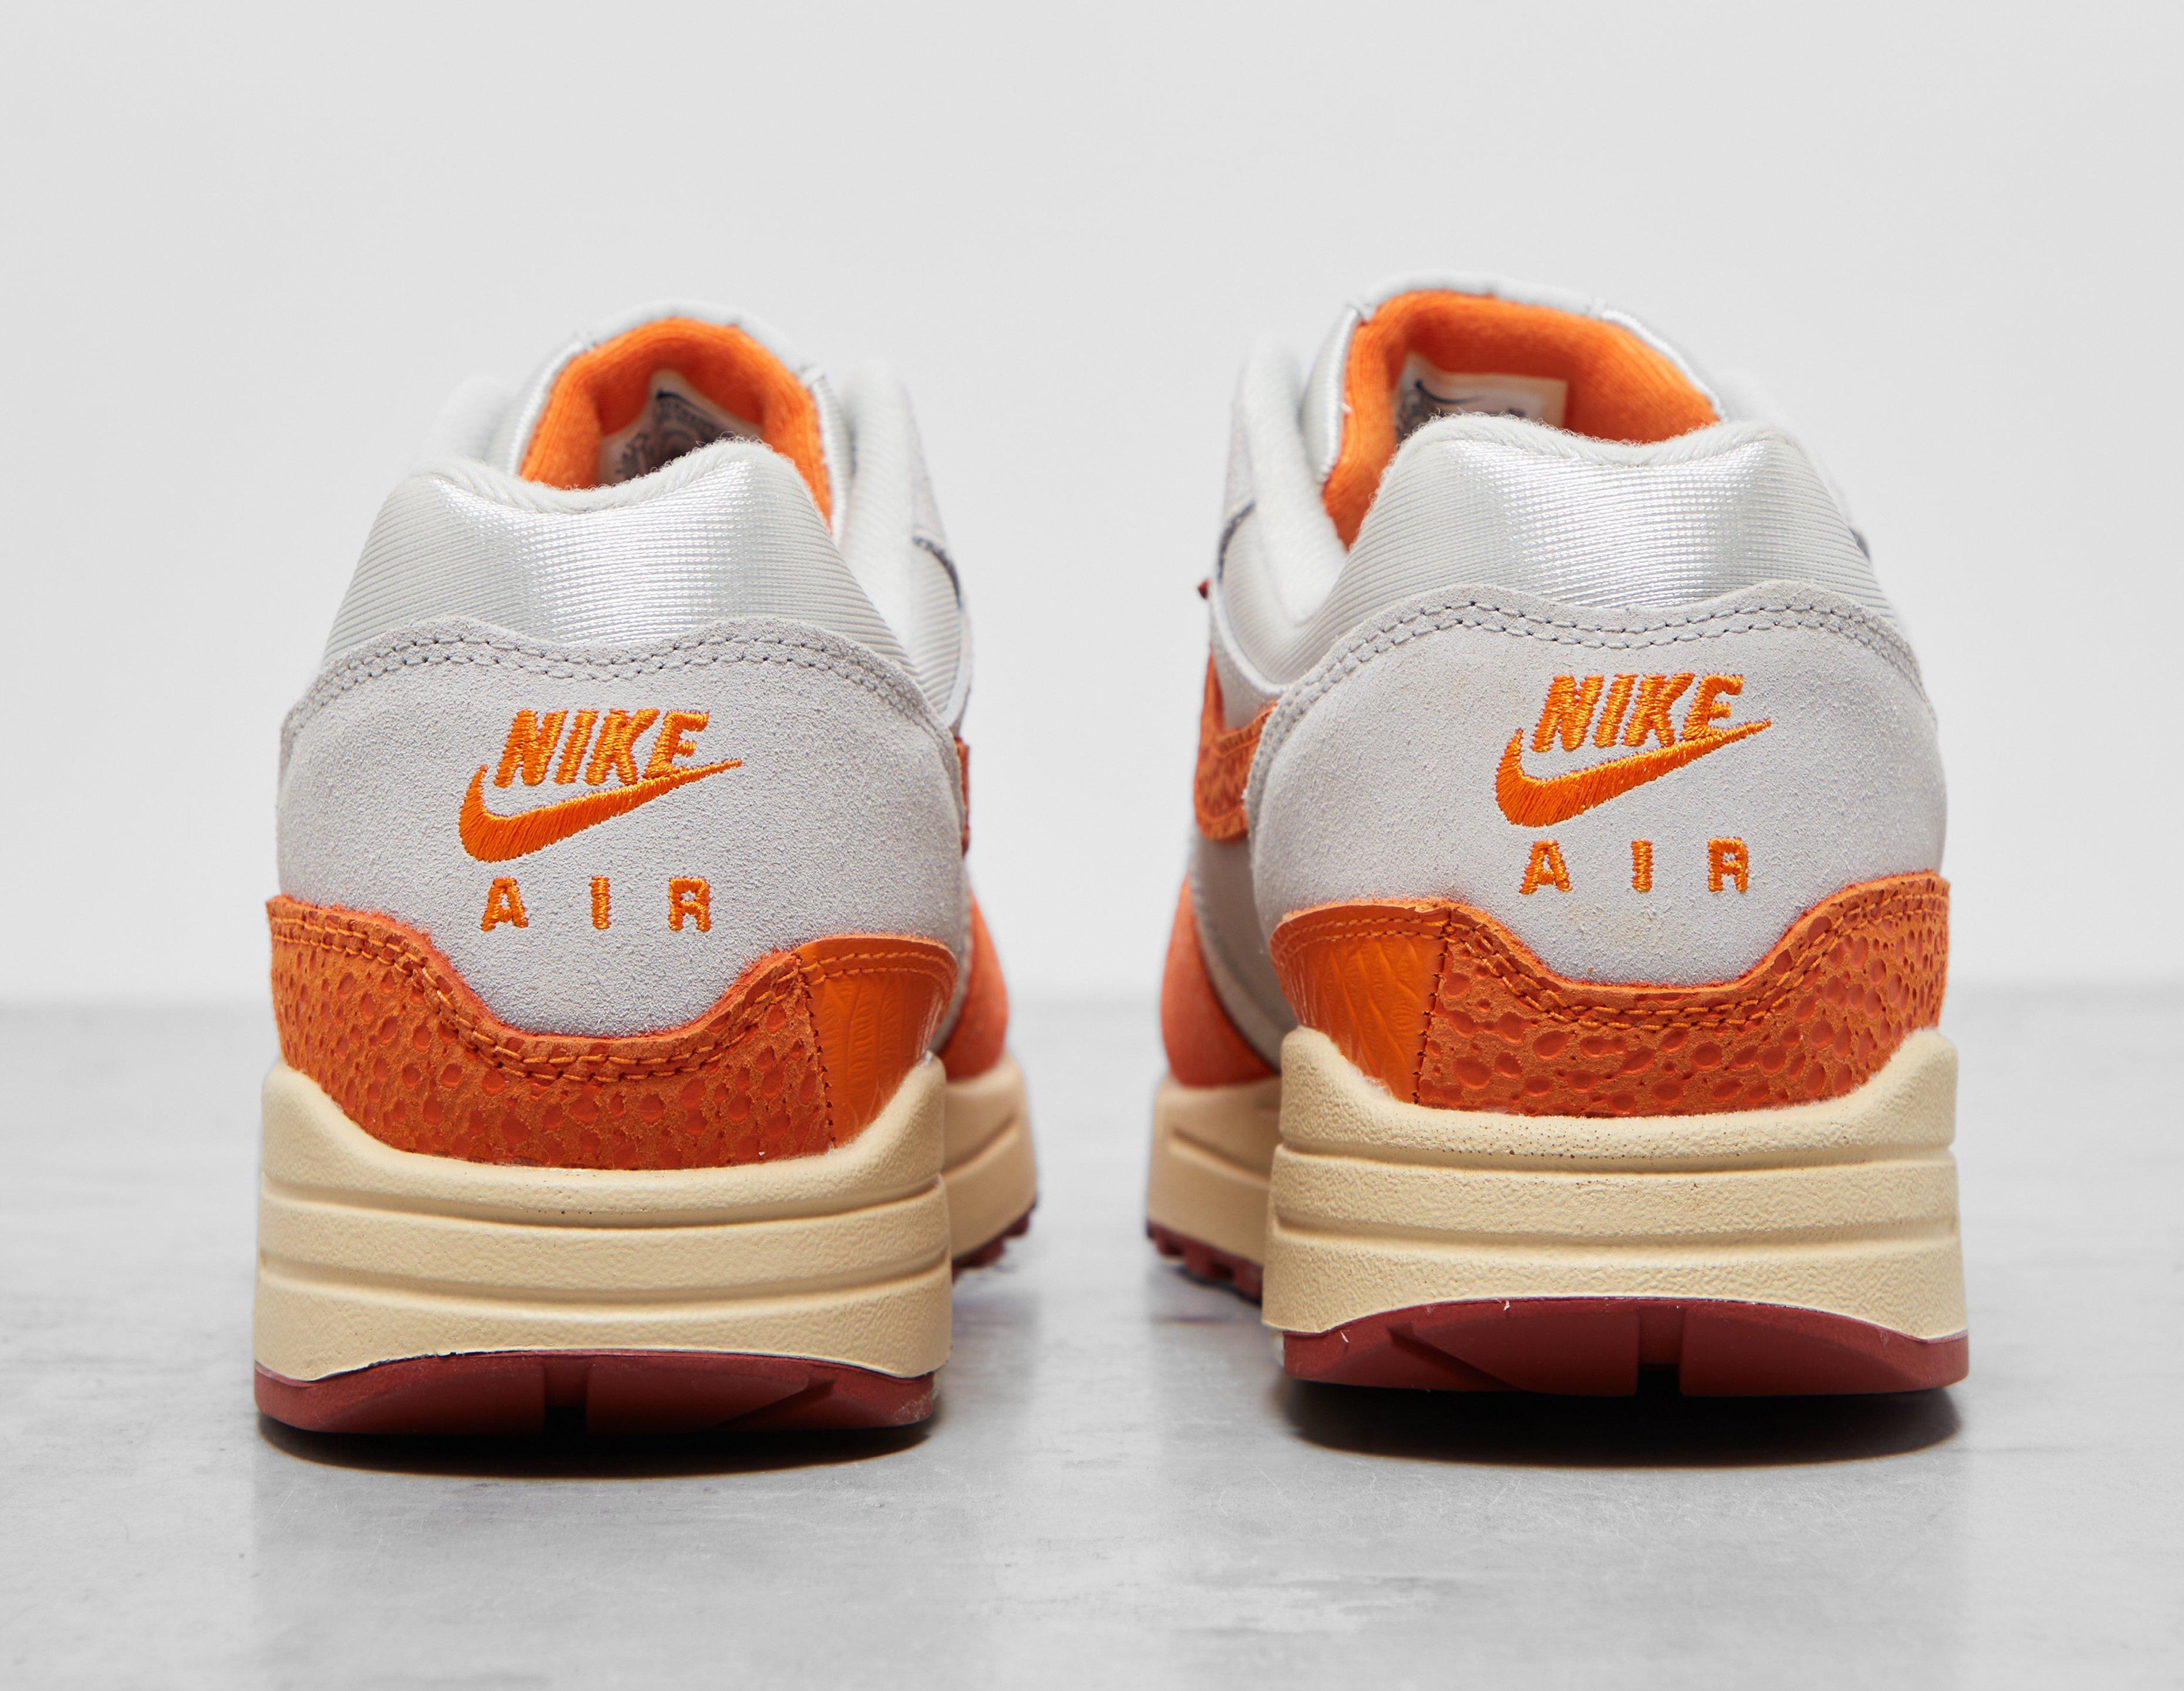 Where to buy Nike Air Force 1 Low Magma Orange Elemental Pink shoes? Price  and more details explored